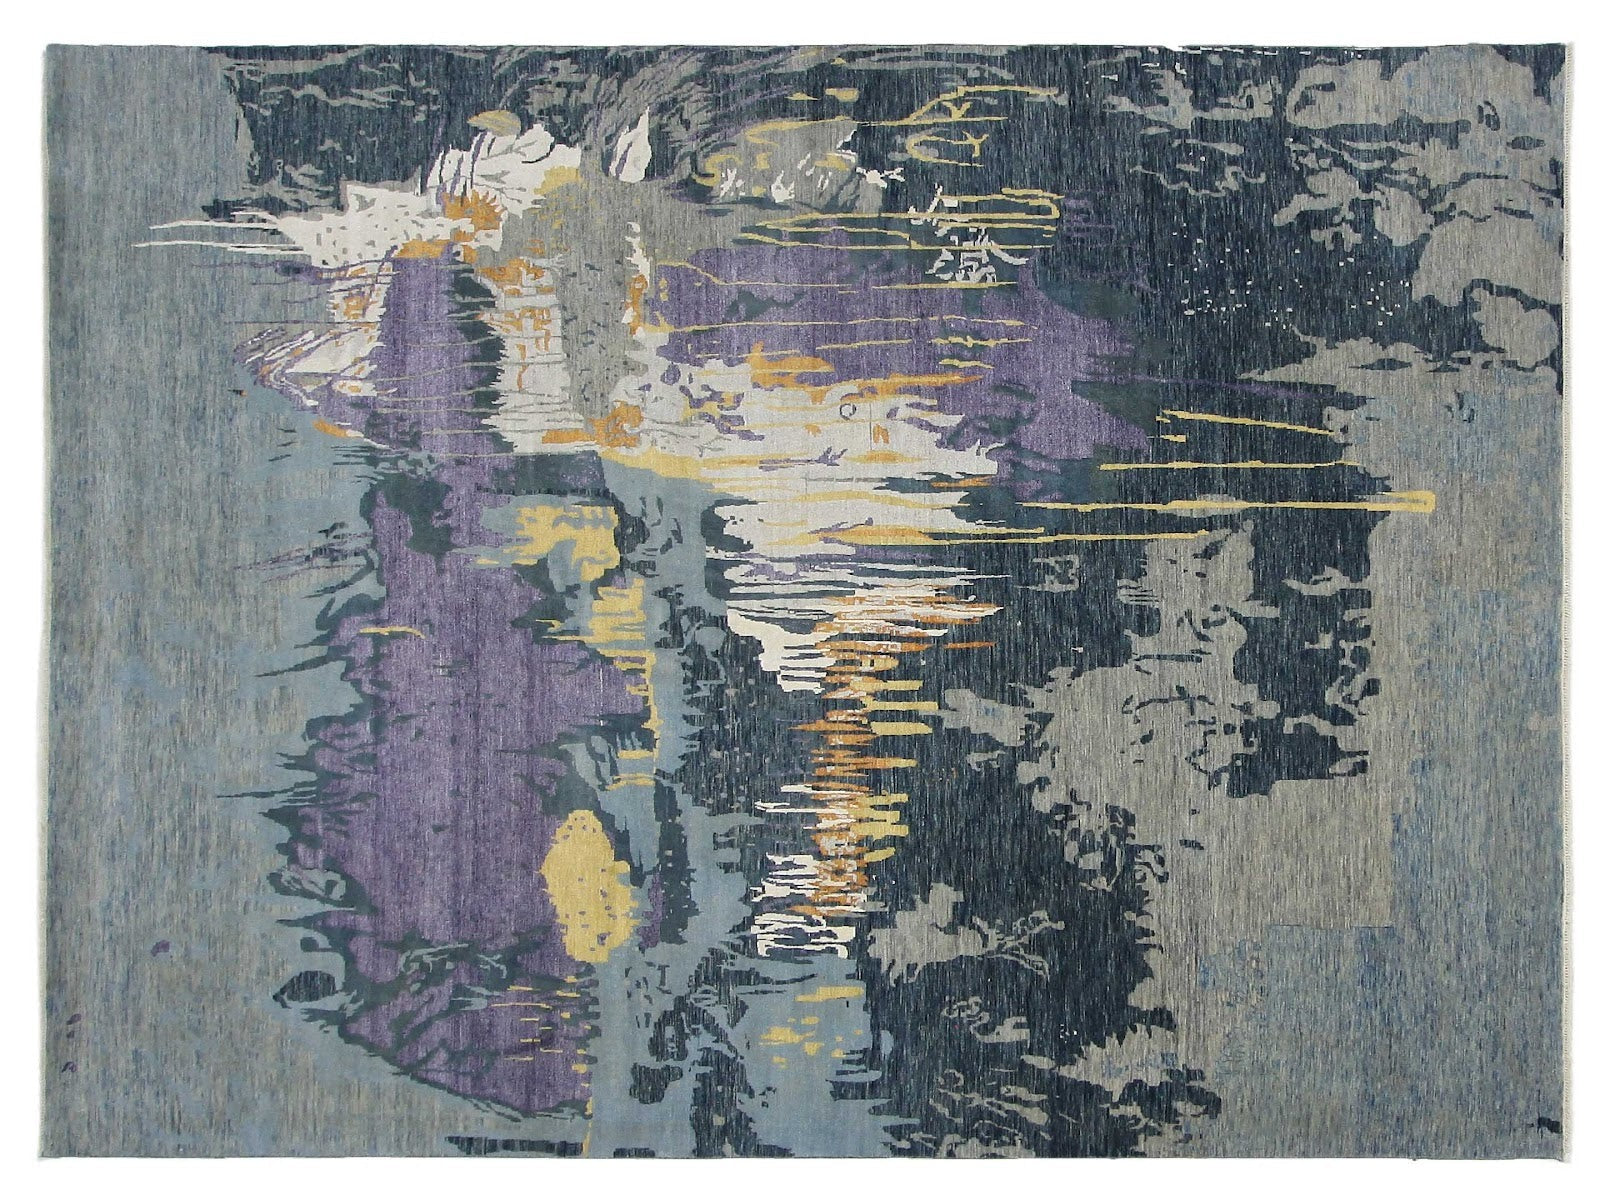 10x14 hand-knotted wool rug with an abstract design, featuring a vibrant color palette set against a grey background